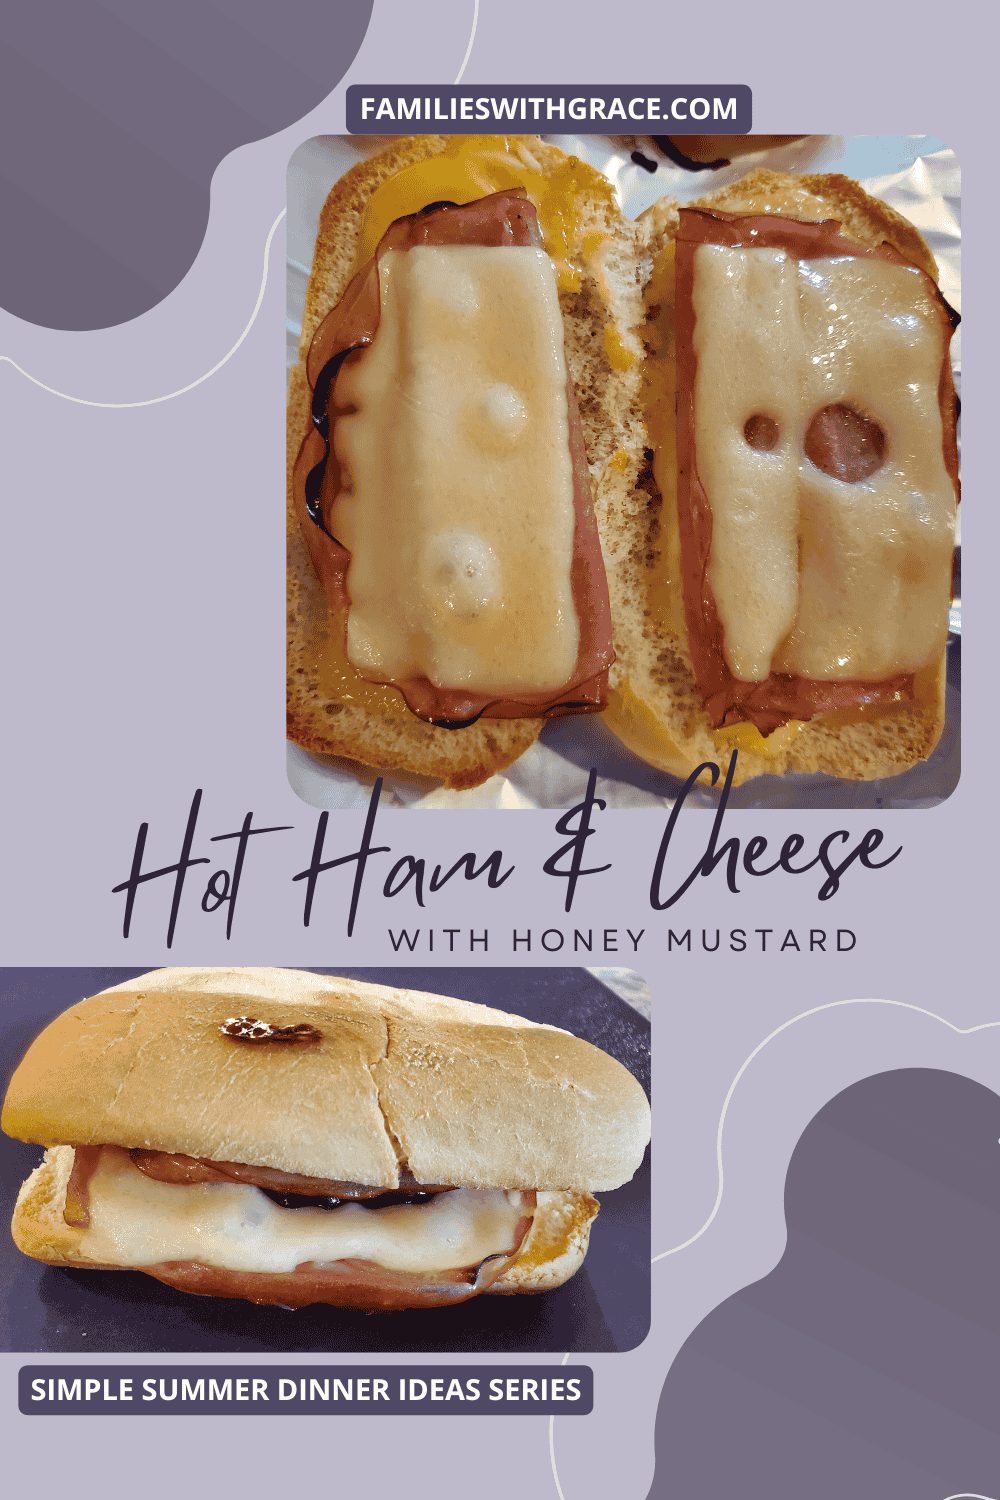 Hot ham and cheese subs with honey mustard